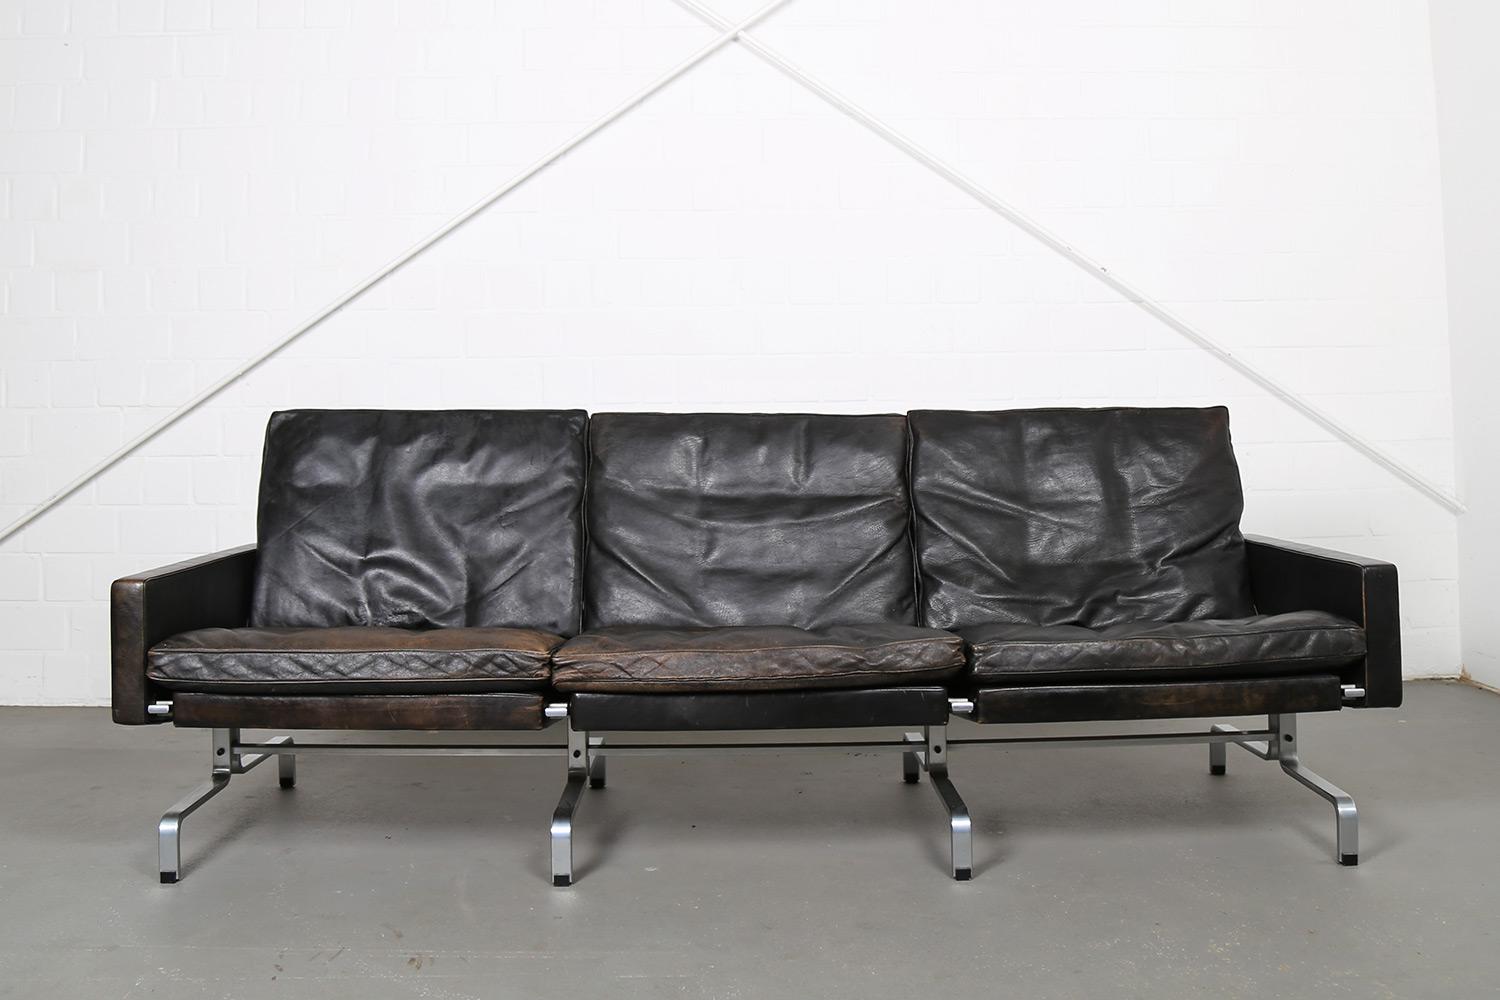 Beautiful, black sofa designed by Poul Kjærholm for E. Kold Christensen in Denmark, 1958. The model is named “PK 31/3”, corresponding to the 3-seater sofa. The sofa has a beautiful patina from the years of usage. Nevertheless, everything has been